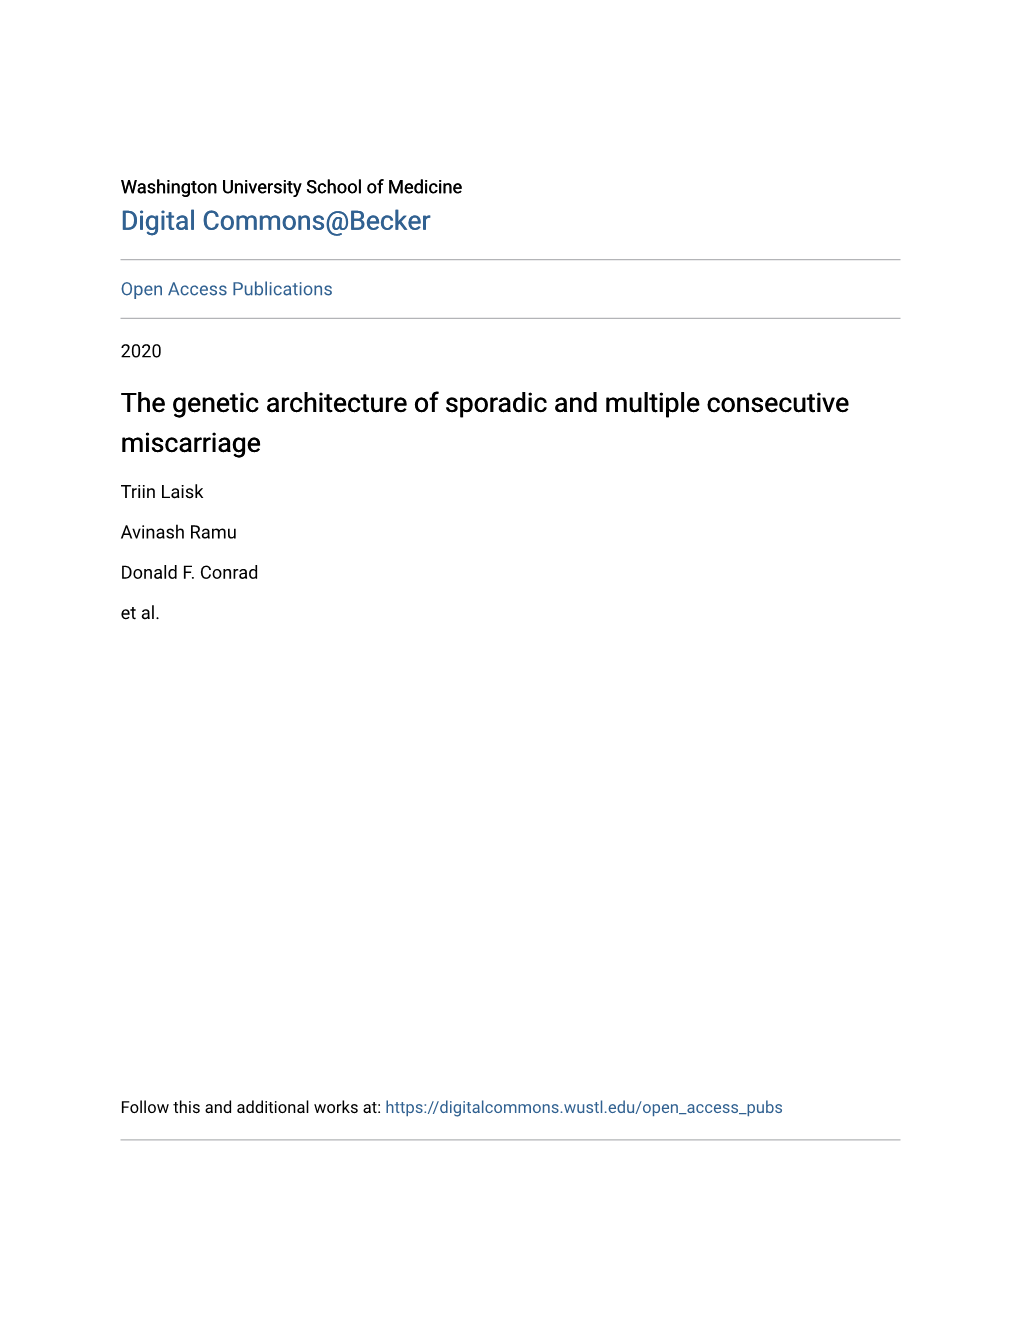 The Genetic Architecture of Sporadic and Multiple Consecutive Miscarriage